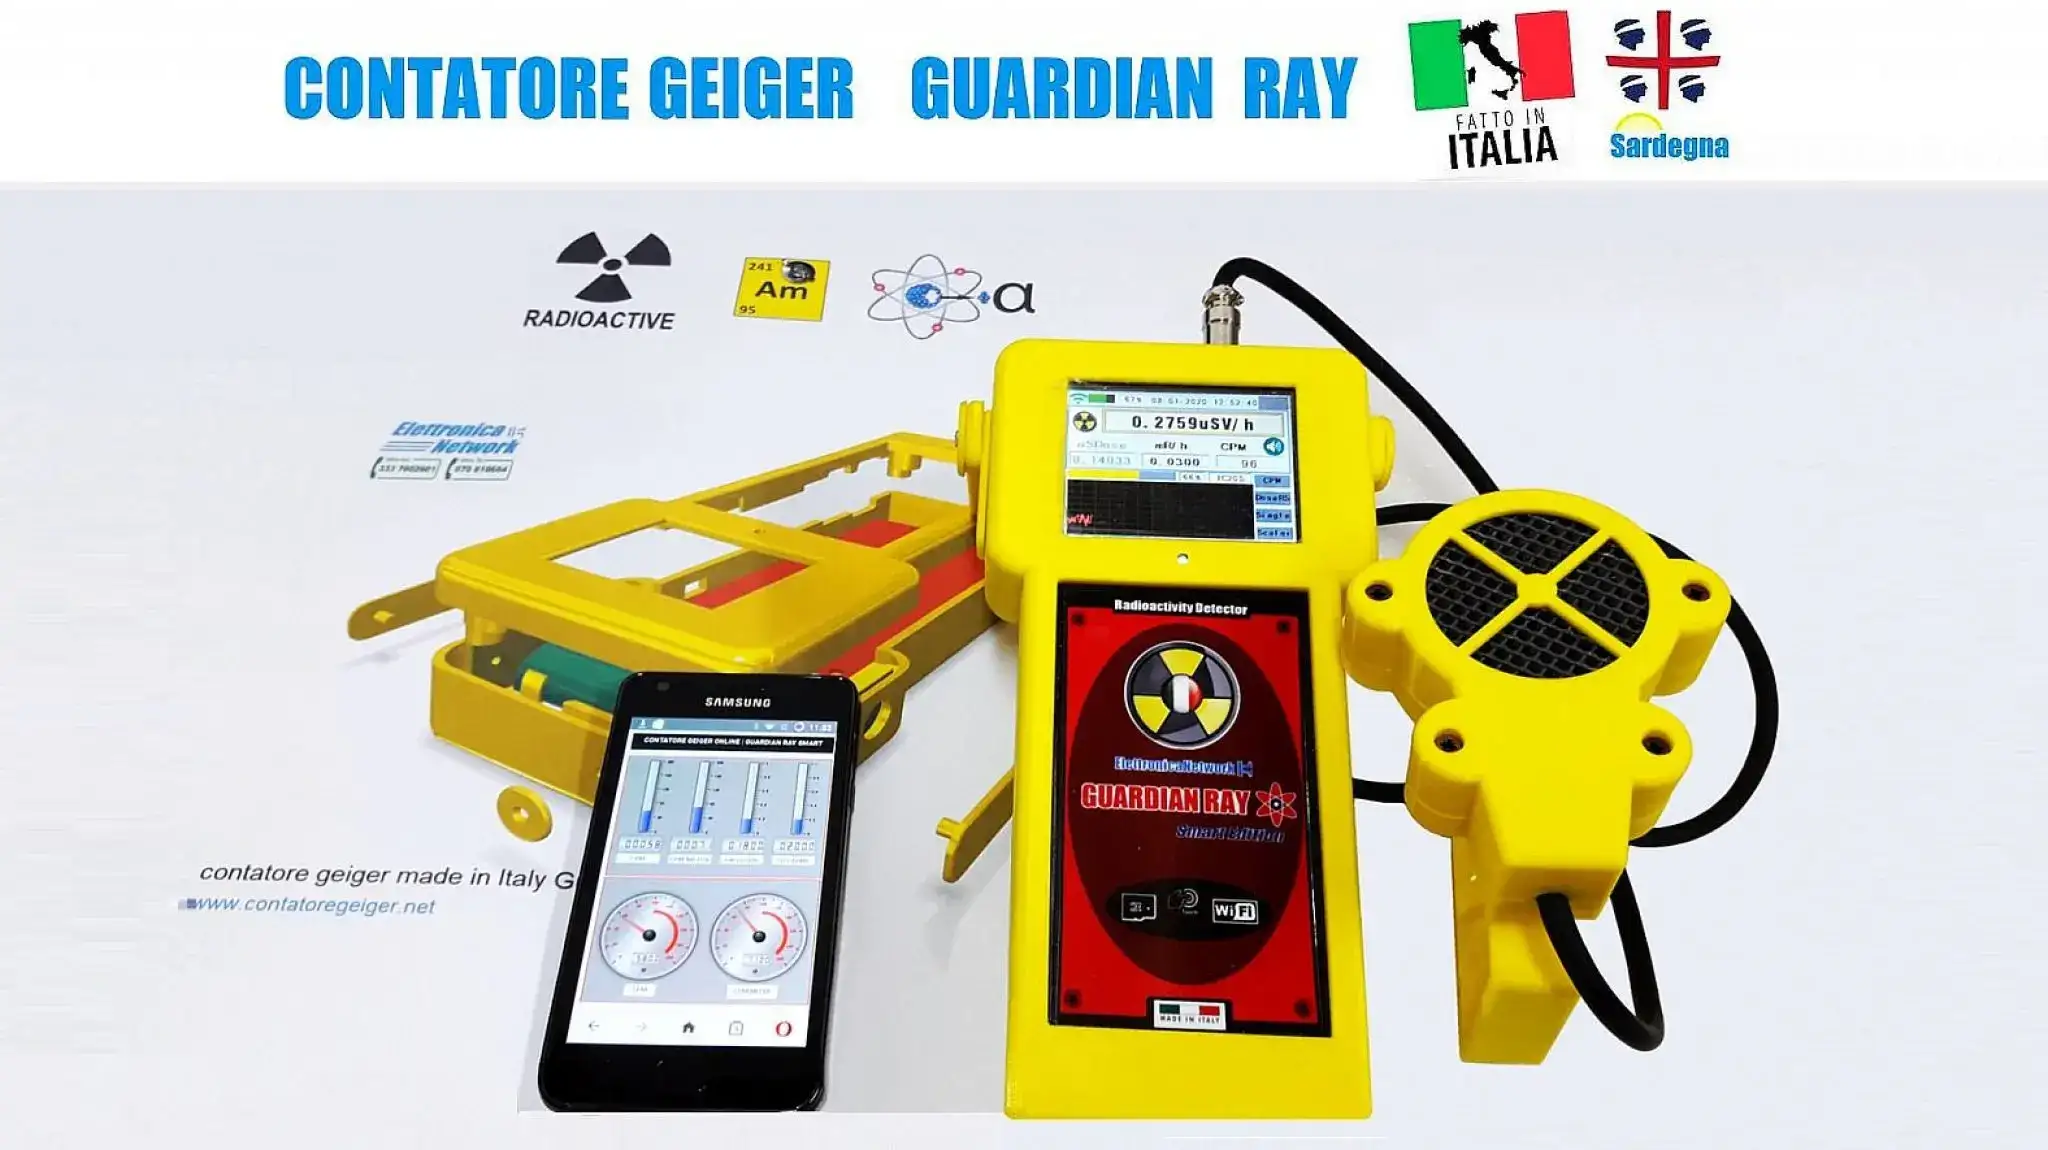 Contatore Geiger Made in Italy Guardian Ray Smart